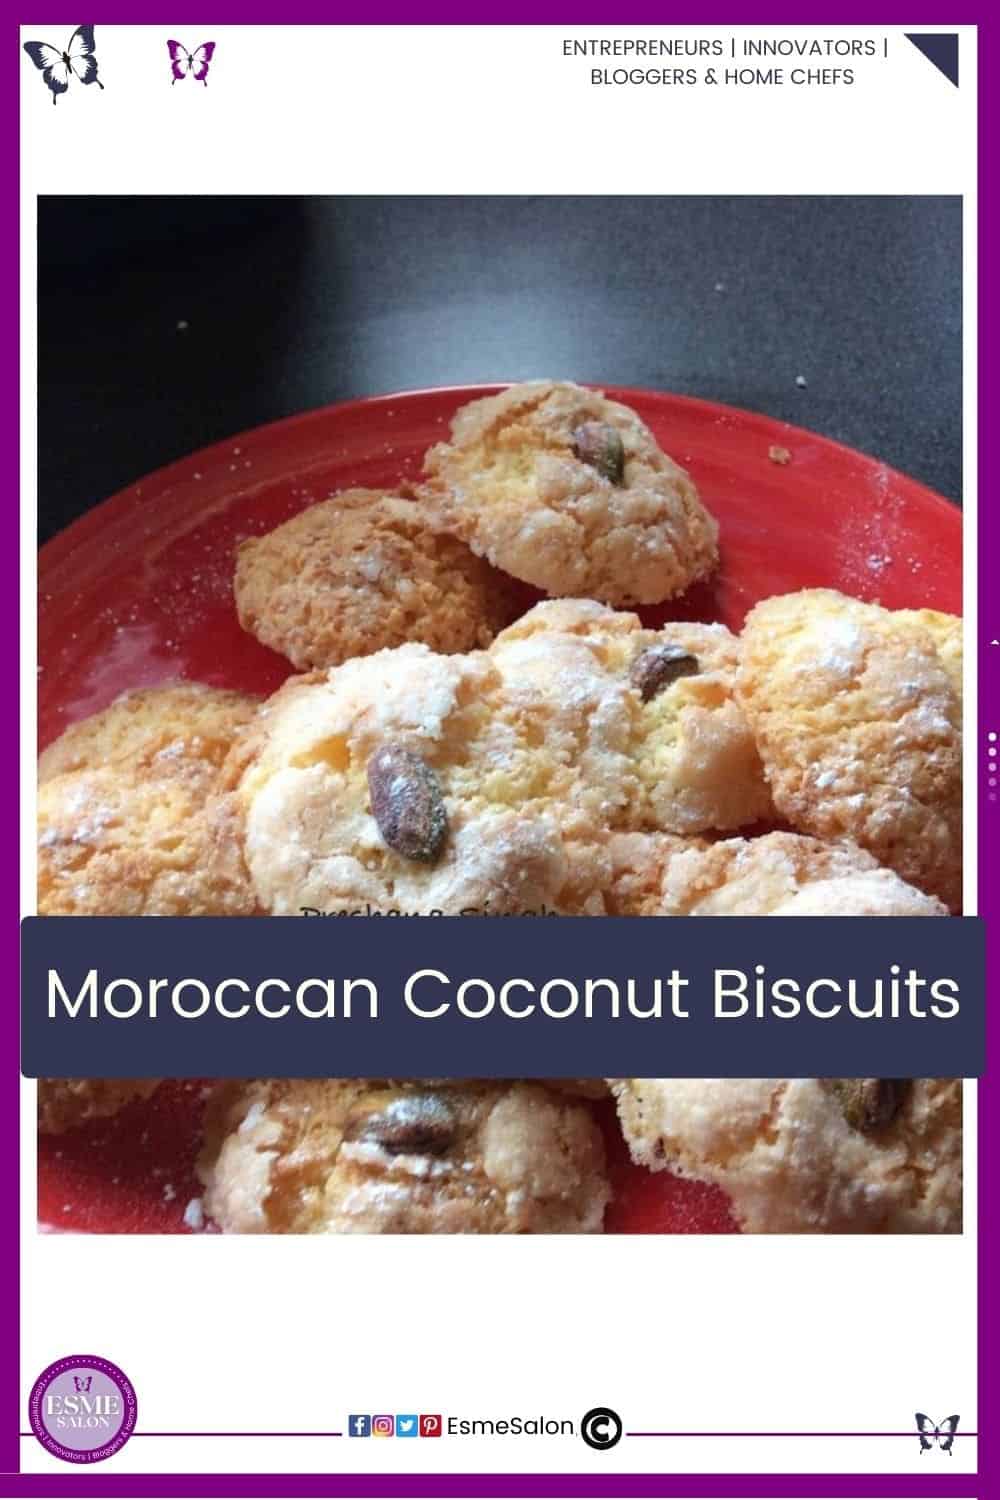 an image of a red plate filled with Moroccan Coconut Biscuits and dusted with icing sugar